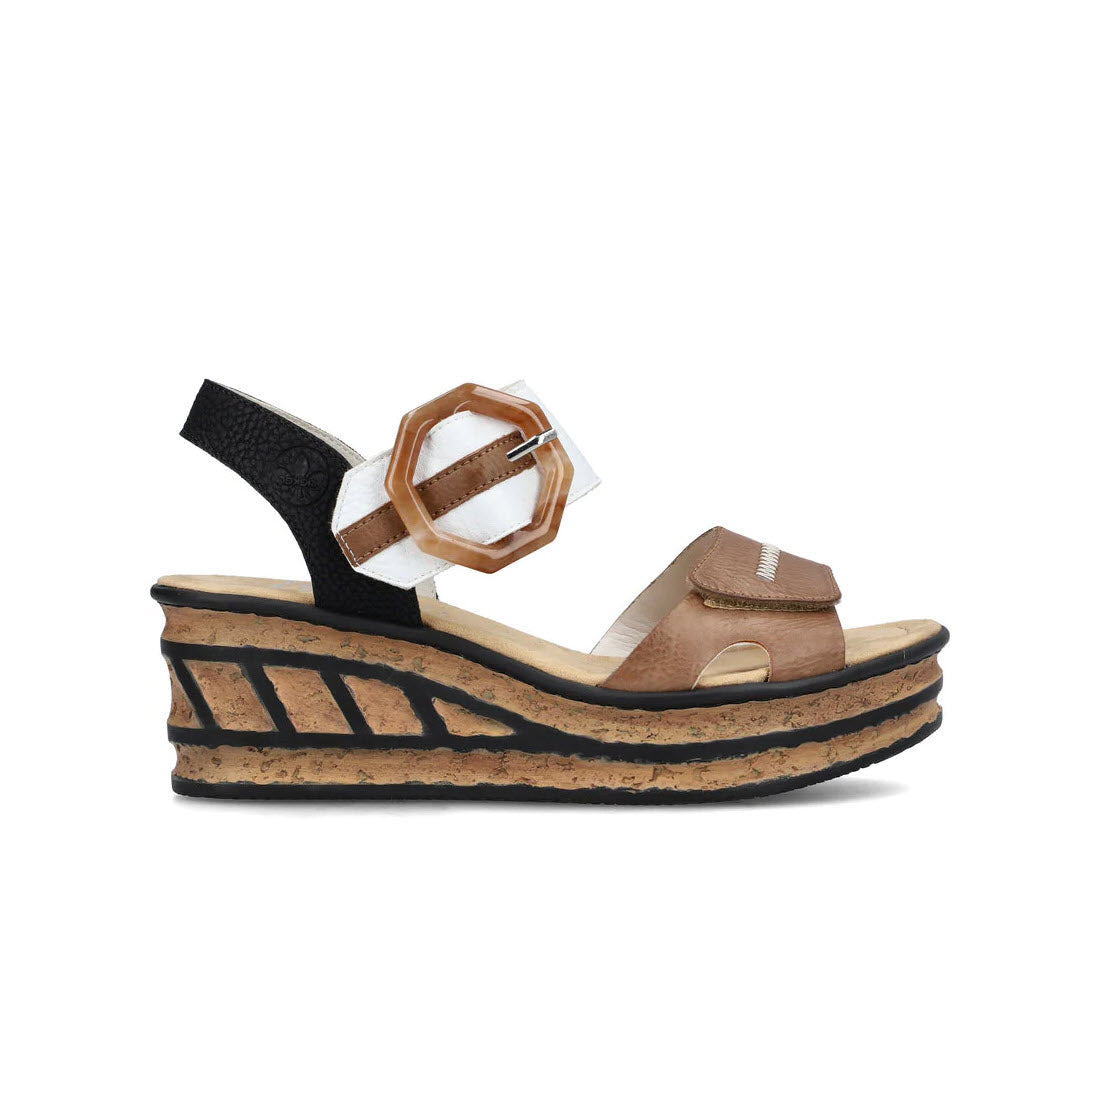 Side view of a Rieker women's wedge sandal with black and tan synthetic leather uppers, a large buckle, and a layered wooden sole.